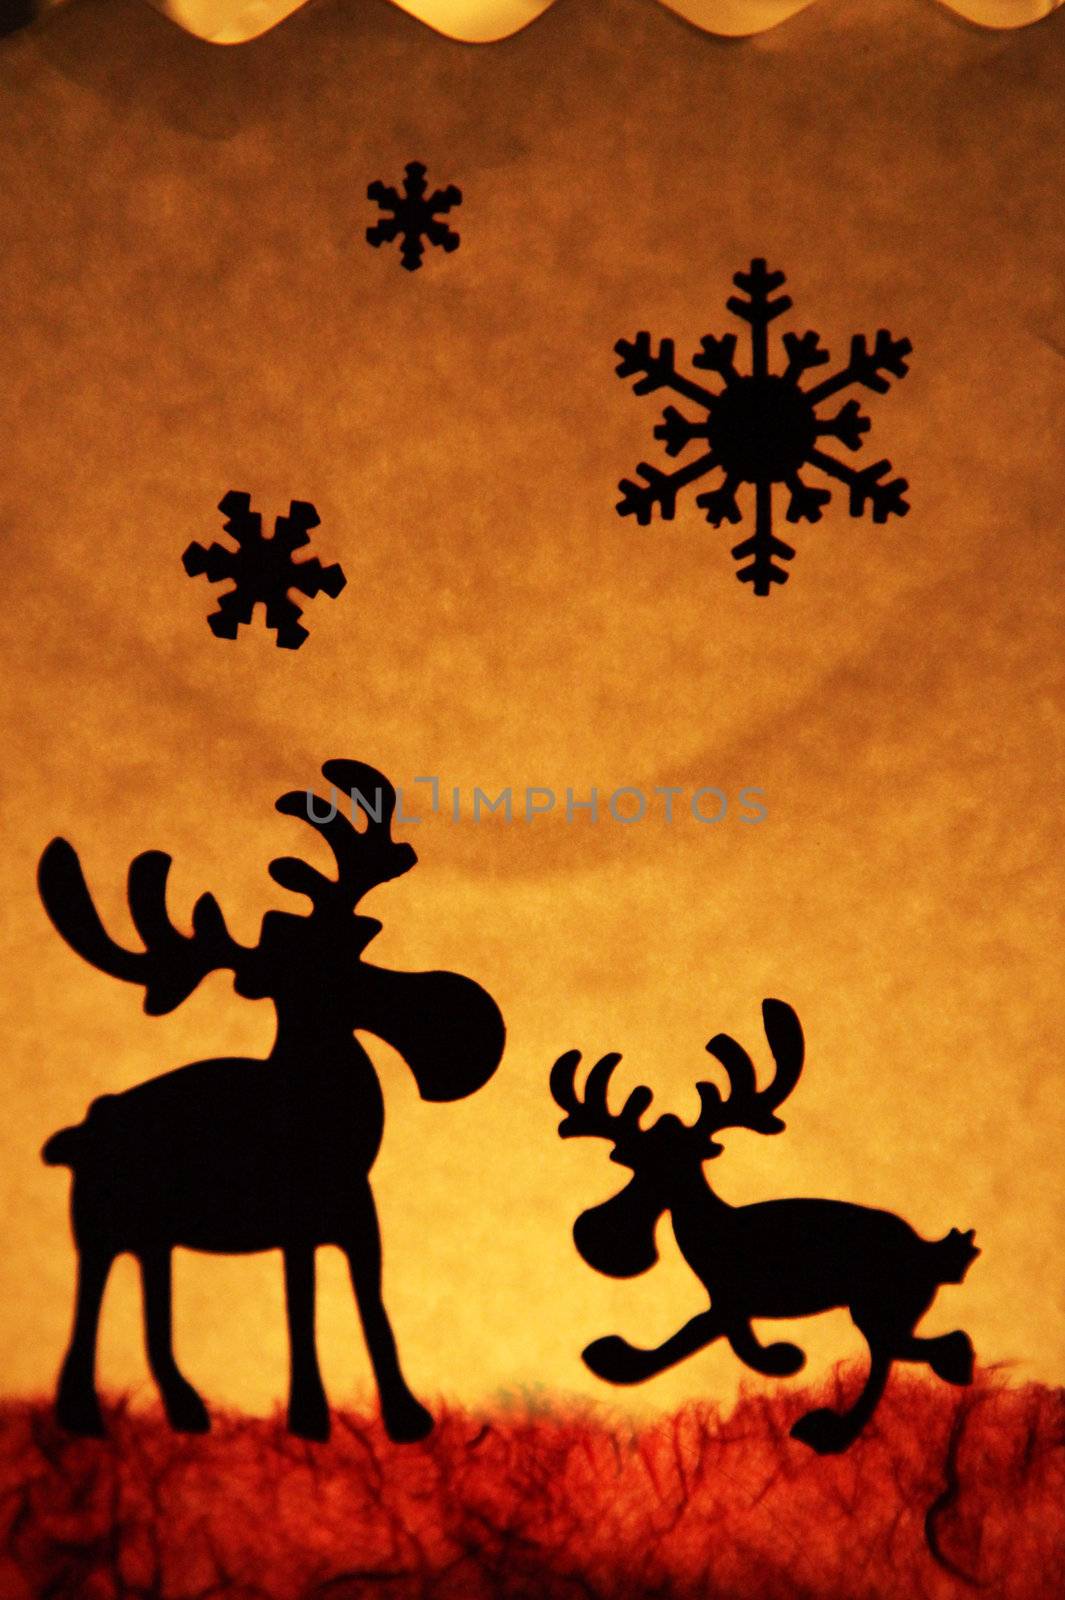 Christmas theme - two reindeer and stars in the sky
